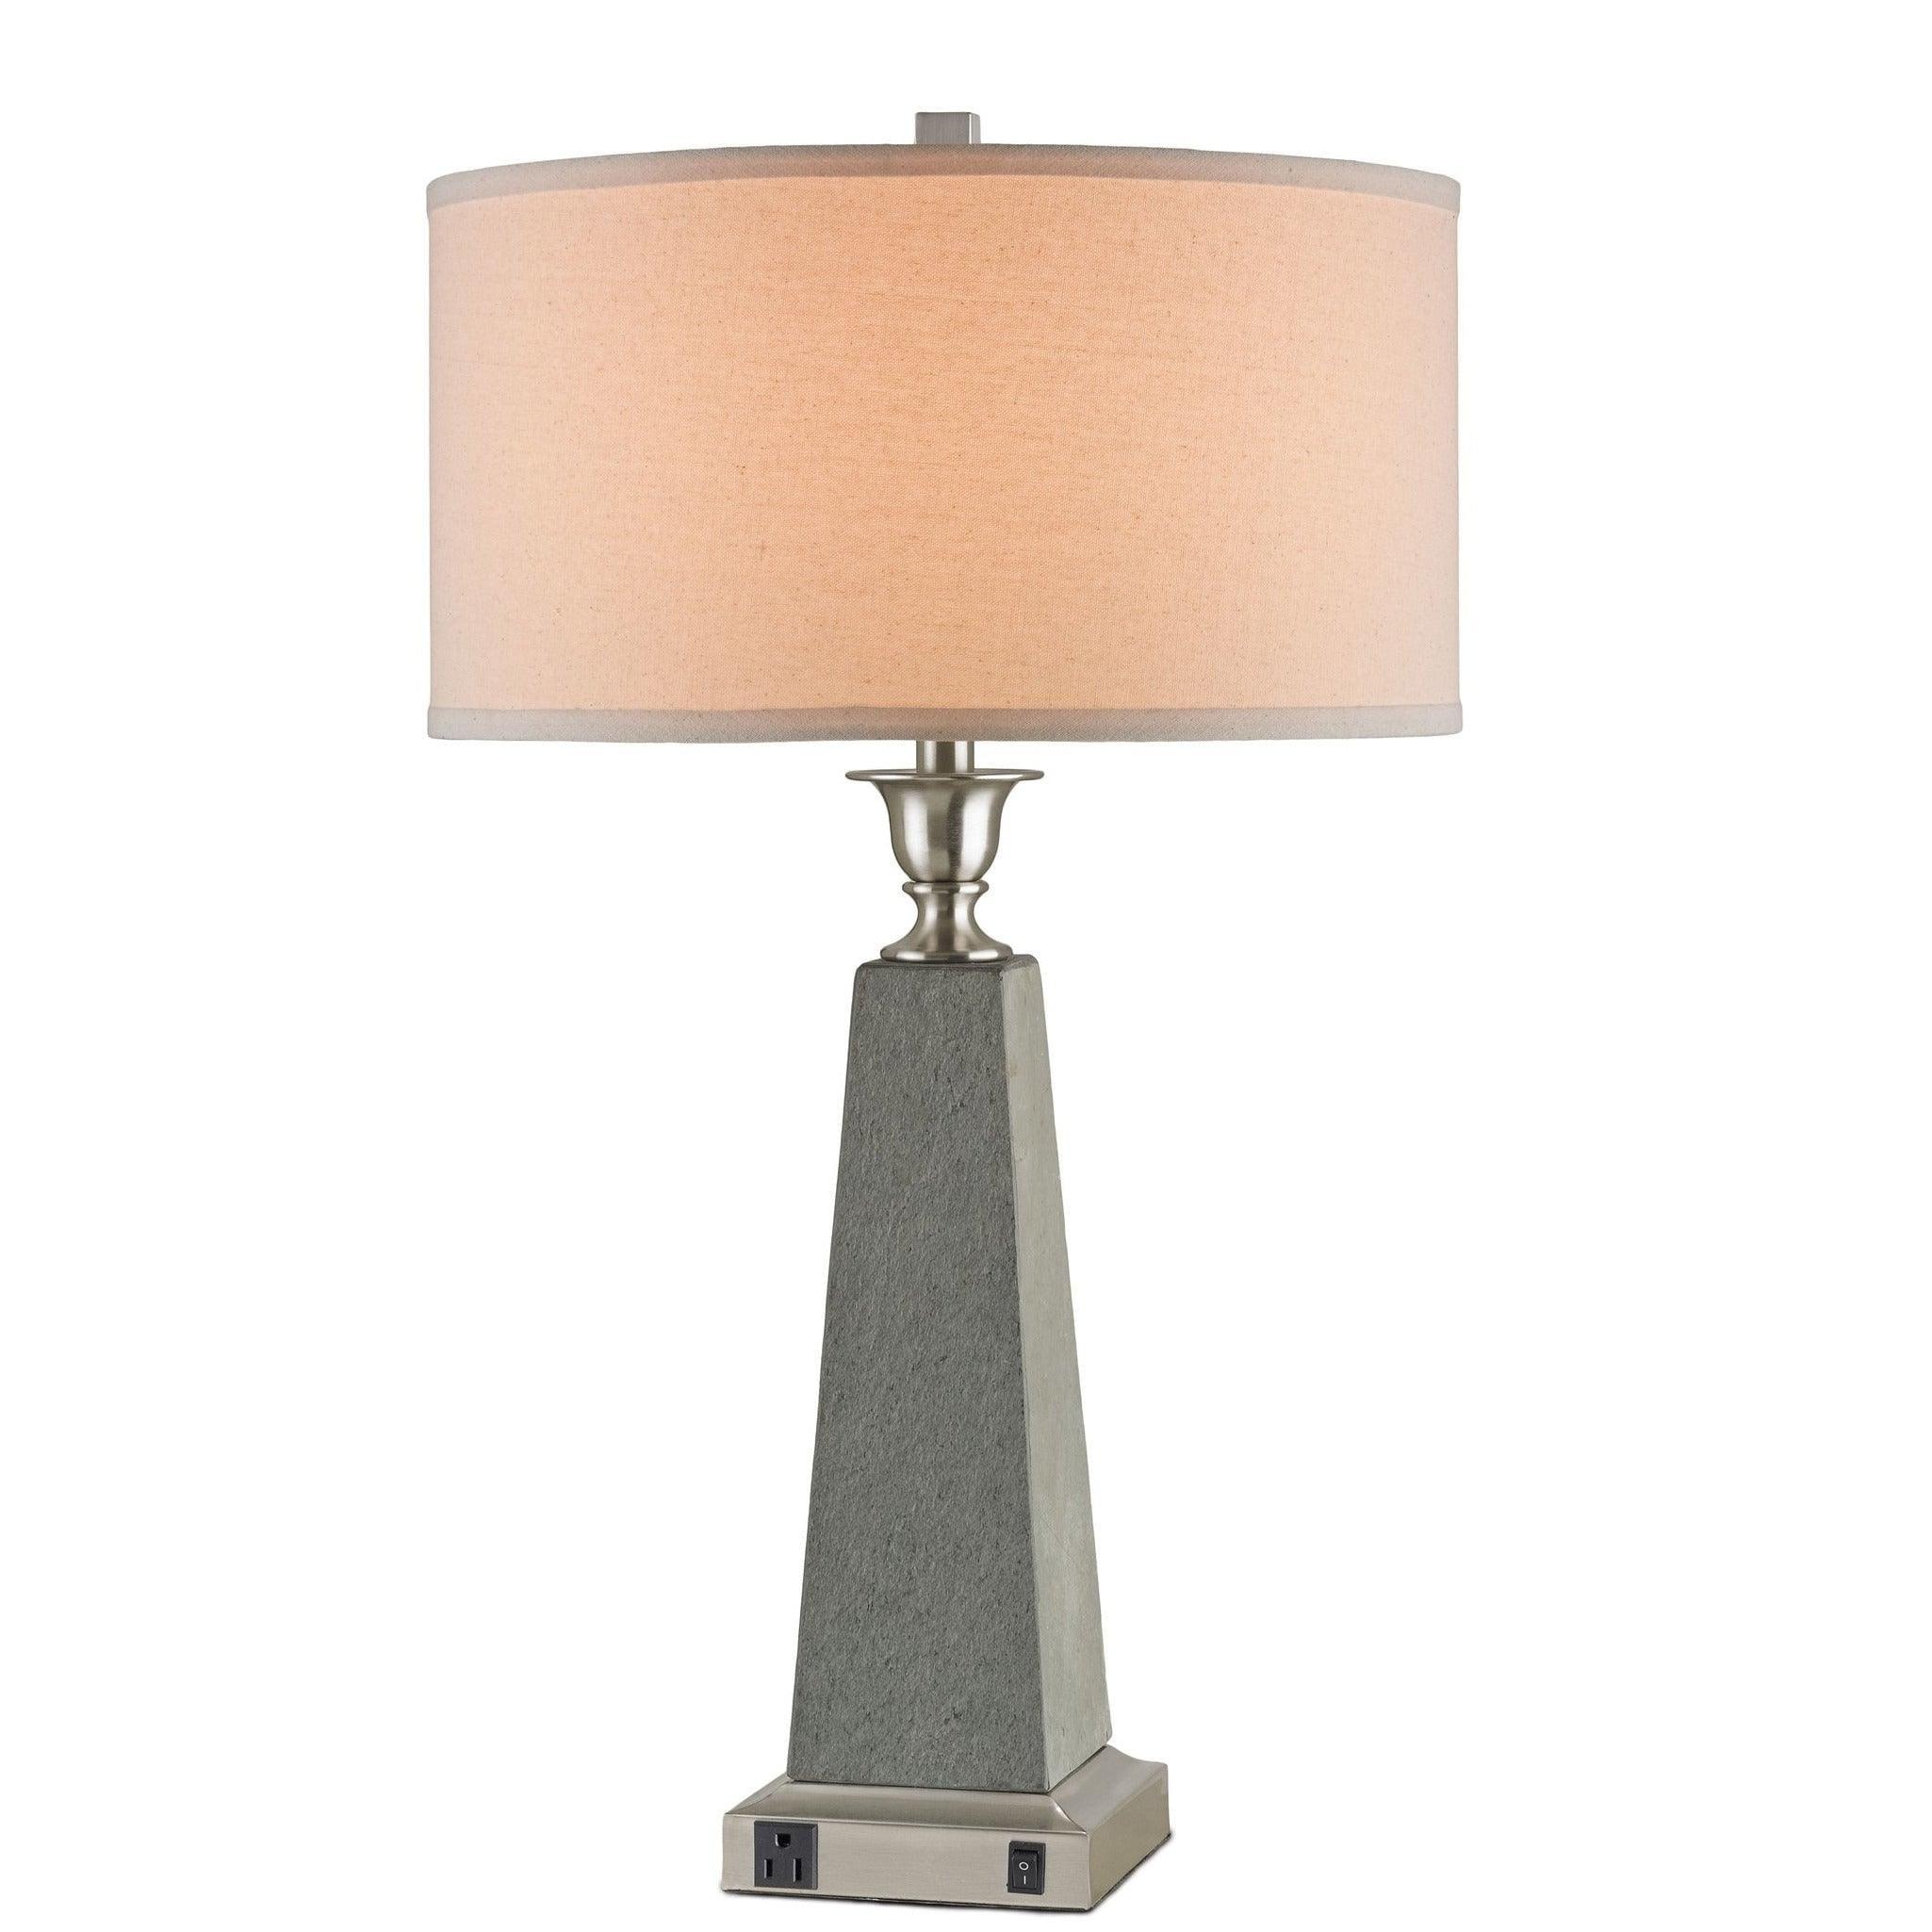 Currey and Company - Langham Table Lamp - H6009 | Montreal Lighting & Hardware